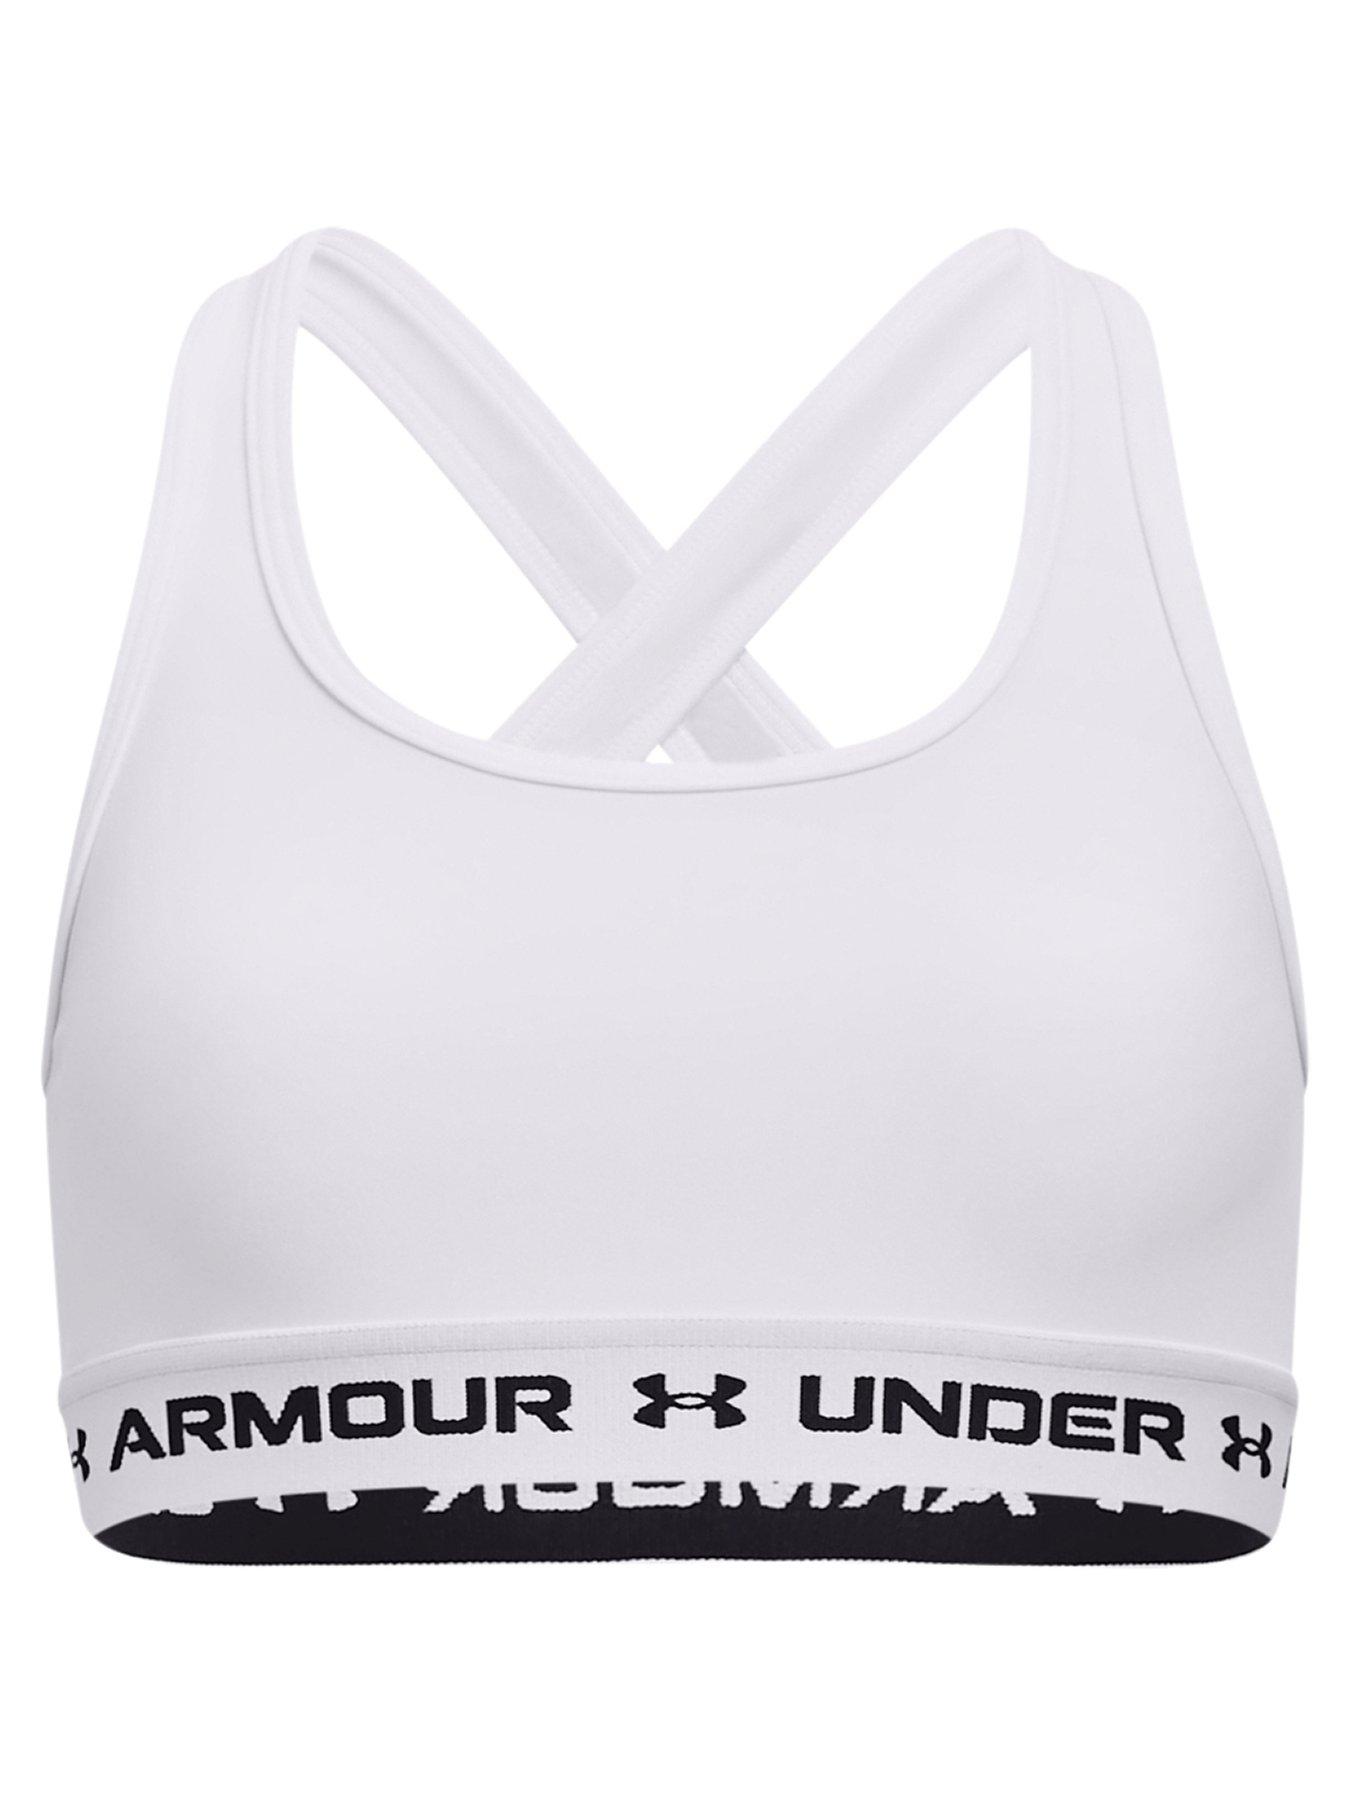 Sports Bras For Women Gym Running, Unique Cross Back Strappy & Honeycomb  Design Front,mid Impact Seamless Yoga Bralette-white(s)